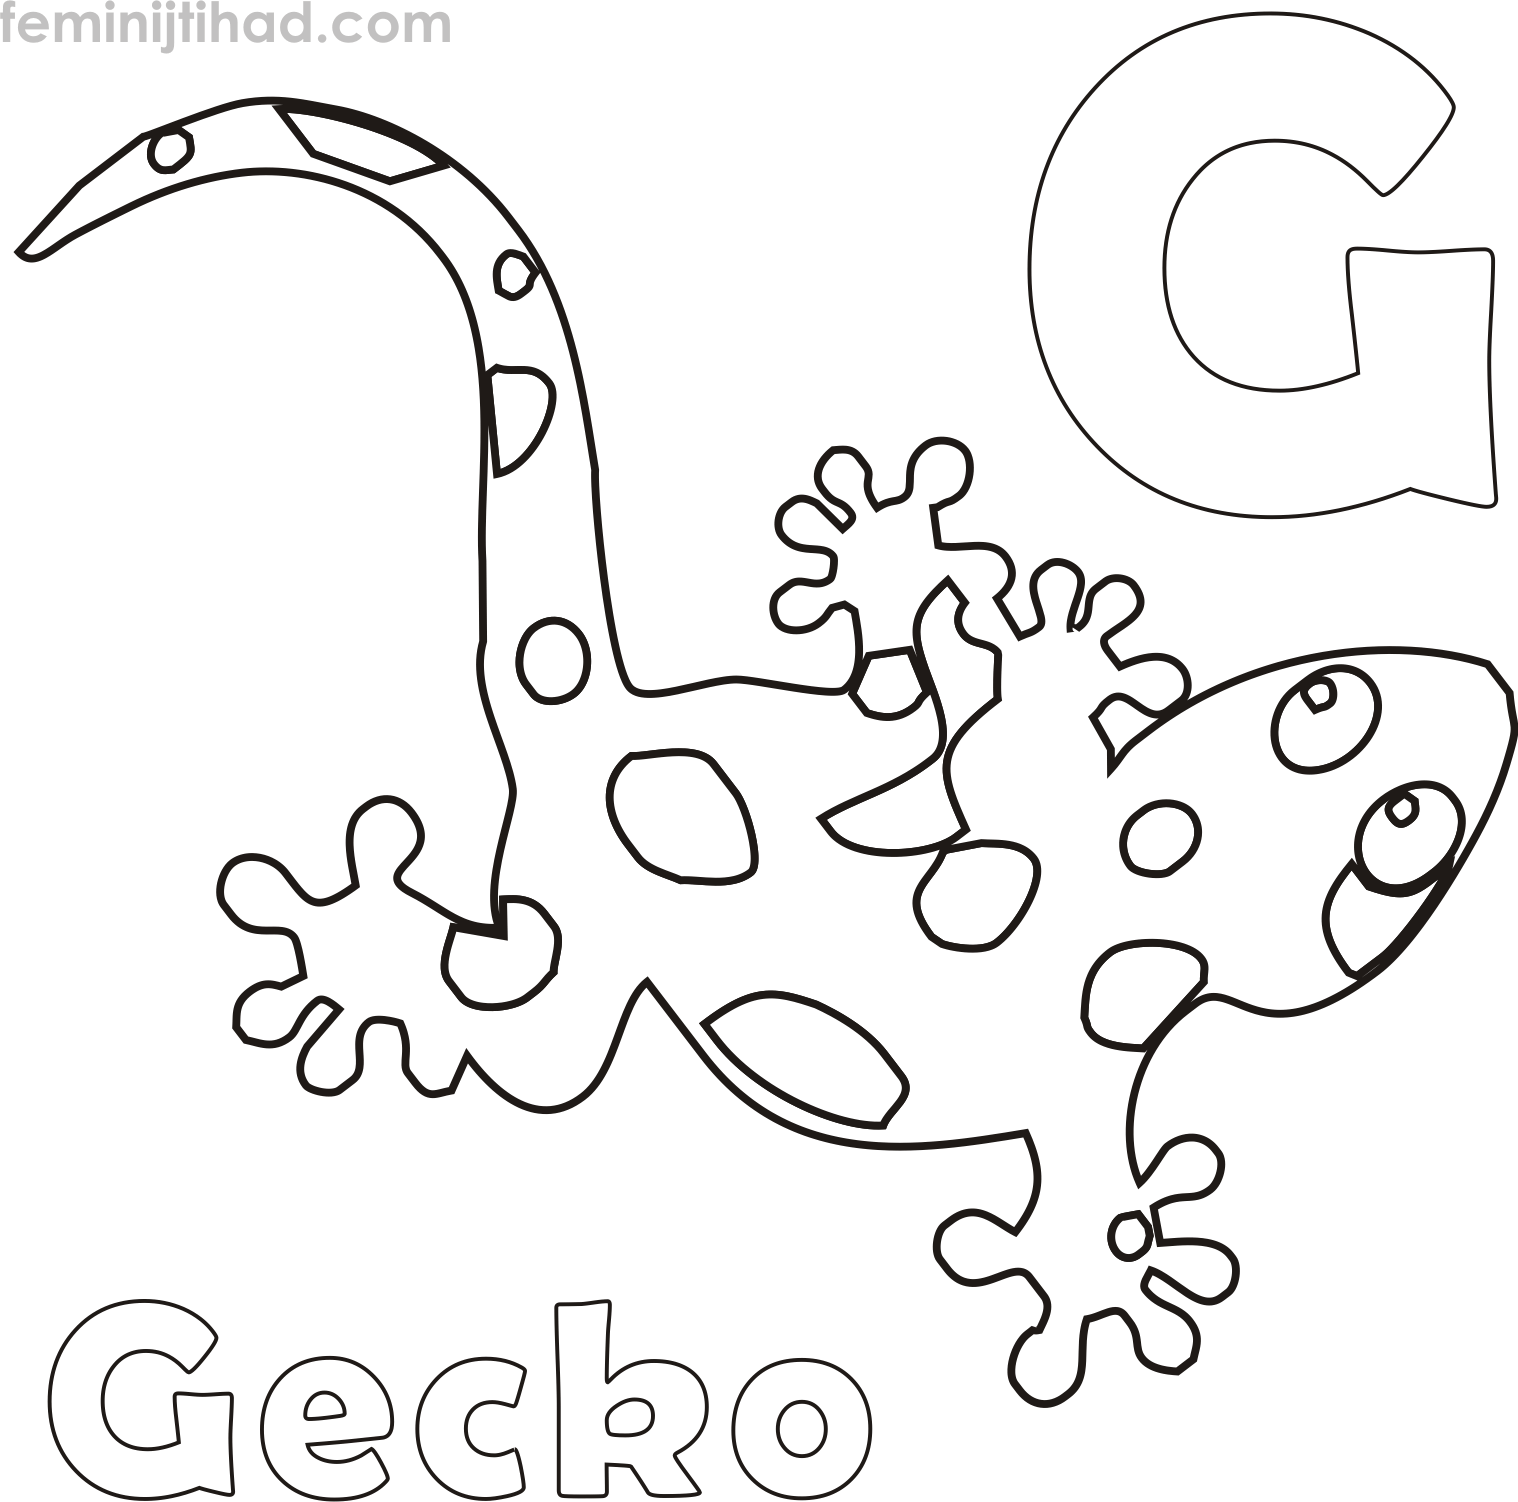 Free Gecko Coloring Page Printable